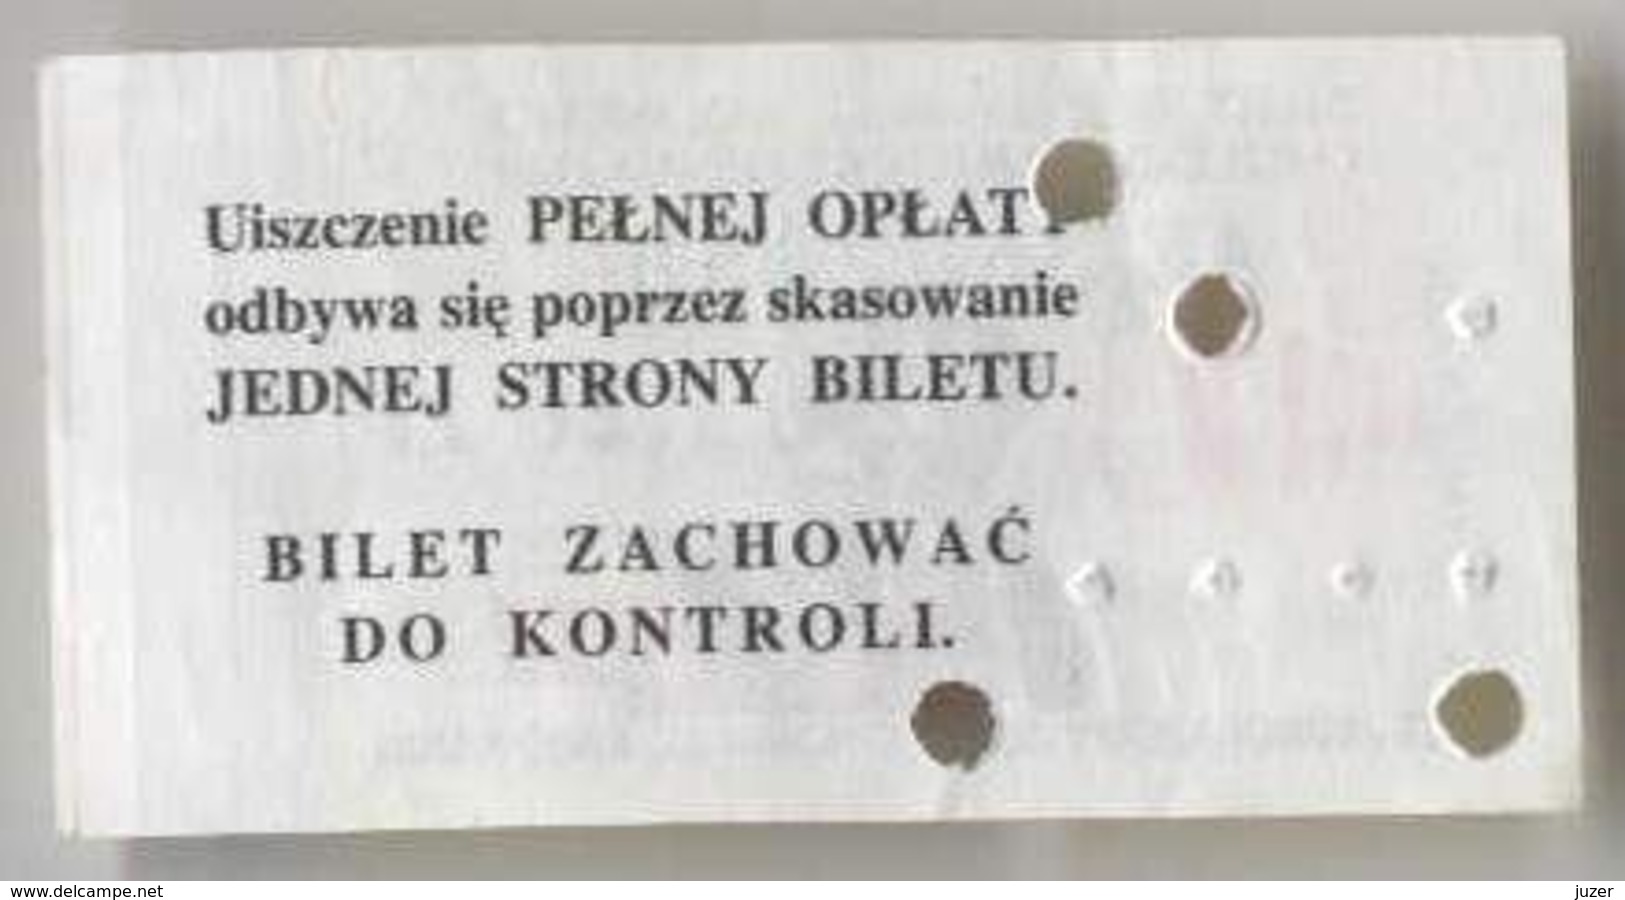 Poland: One-way Tram & Bus Ticket From Warsaw (1) - Europe